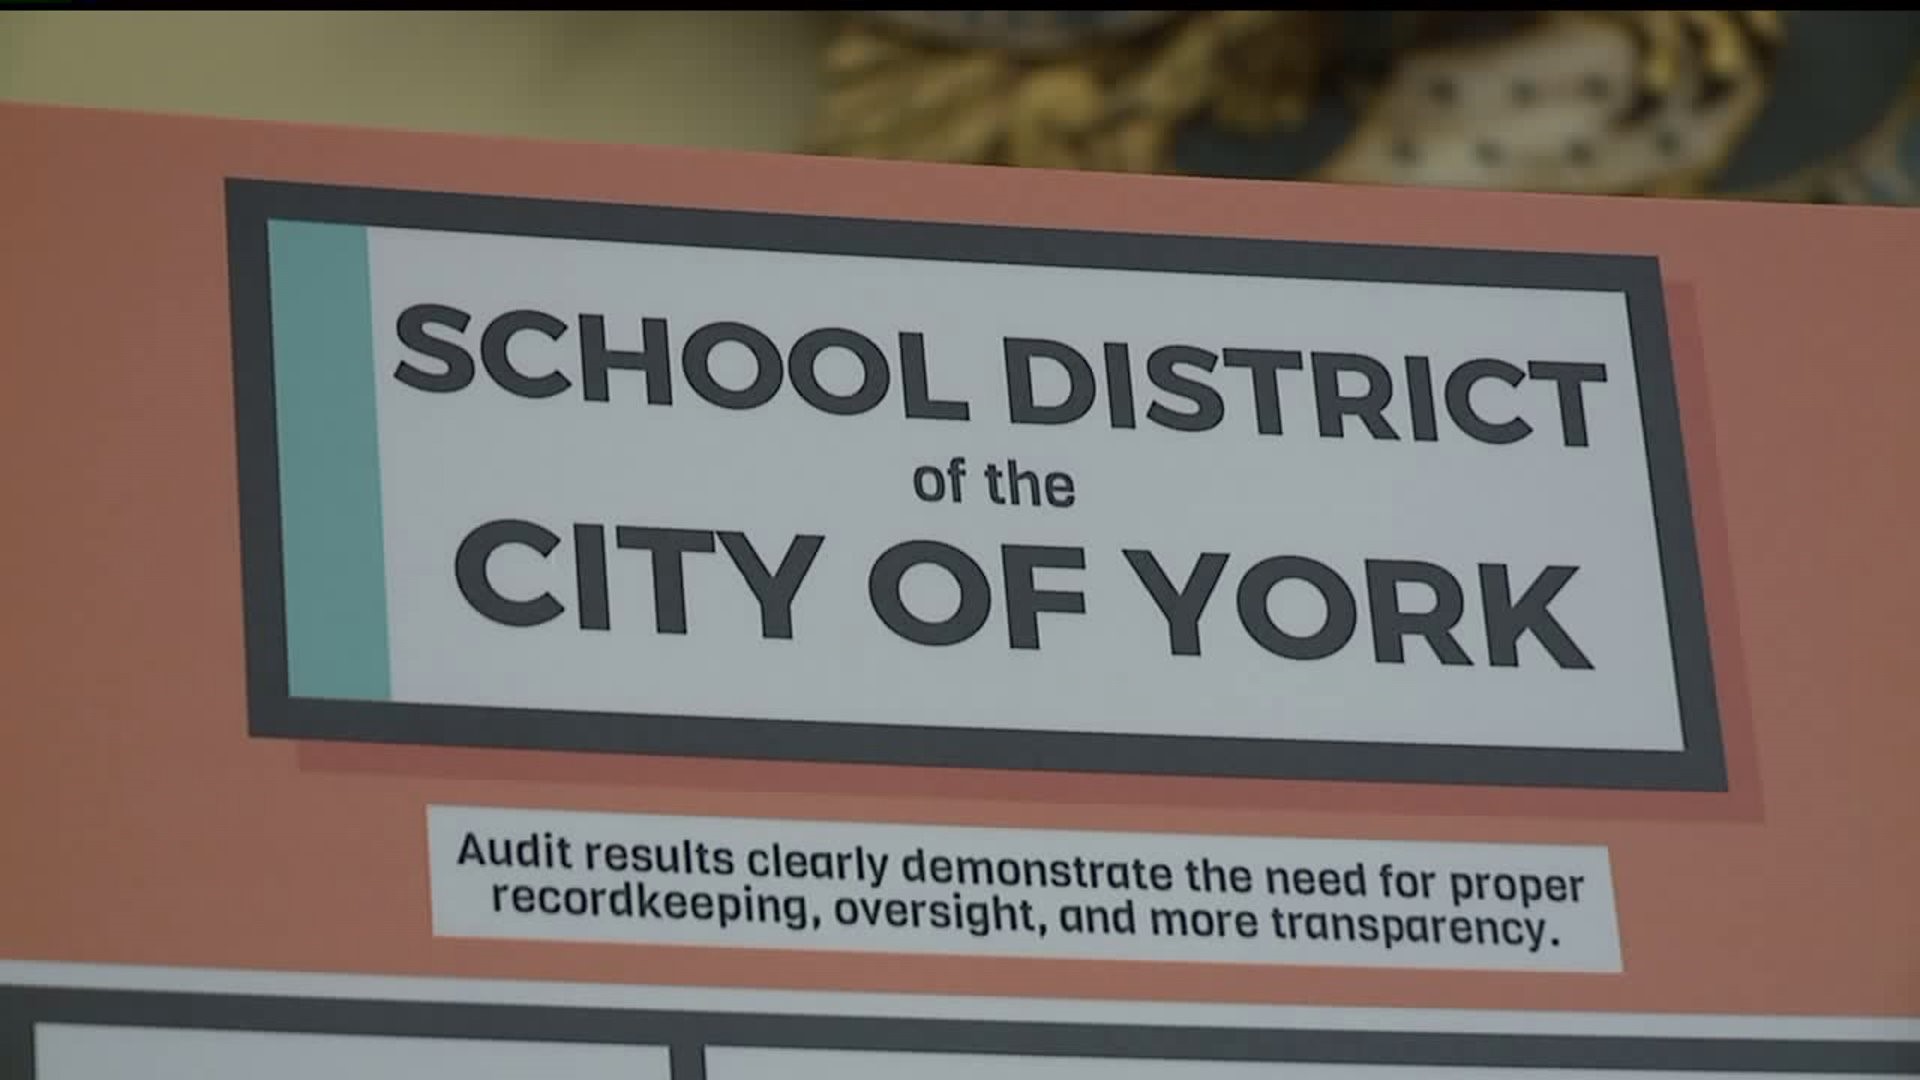 Pa. Auditor General says some findings in York City School District audit